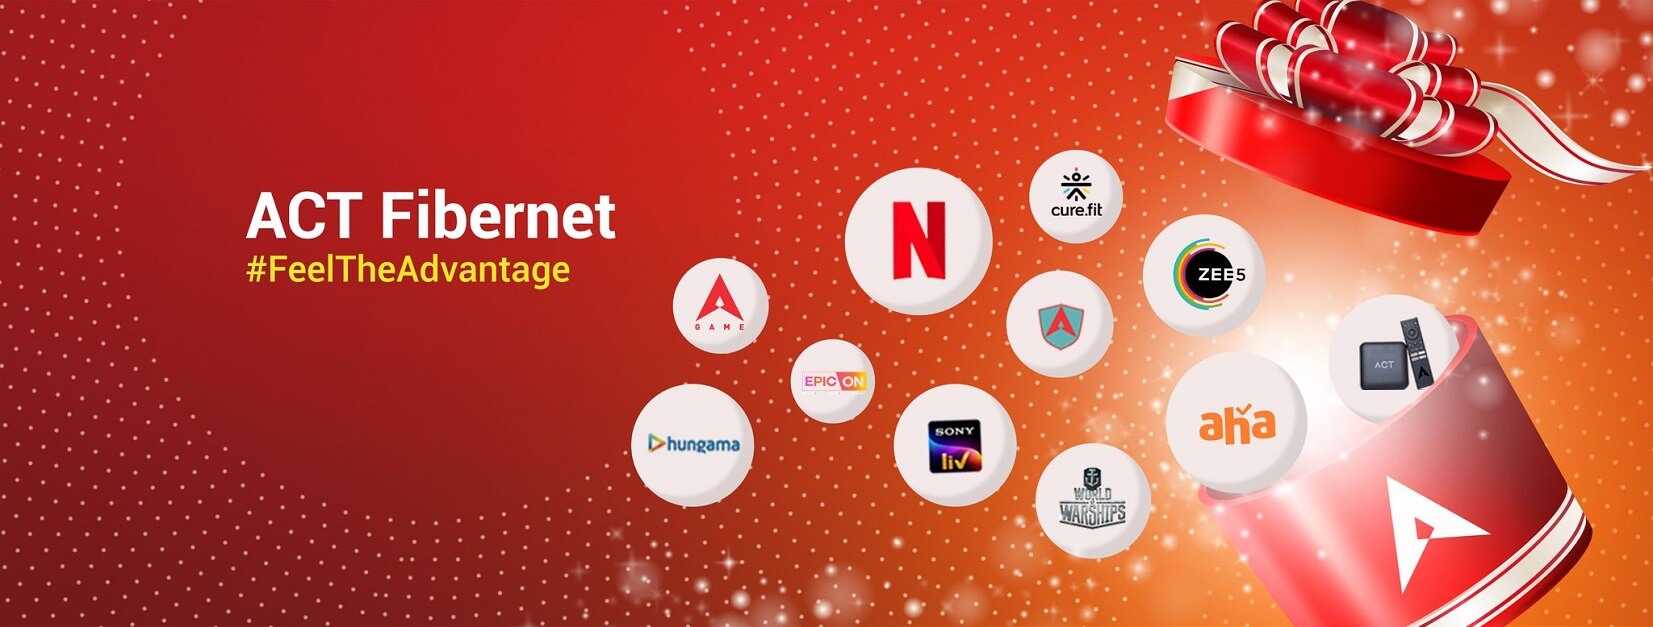 How To Get Zee5 With ACT Fibernet Internet Connection In Chennai?